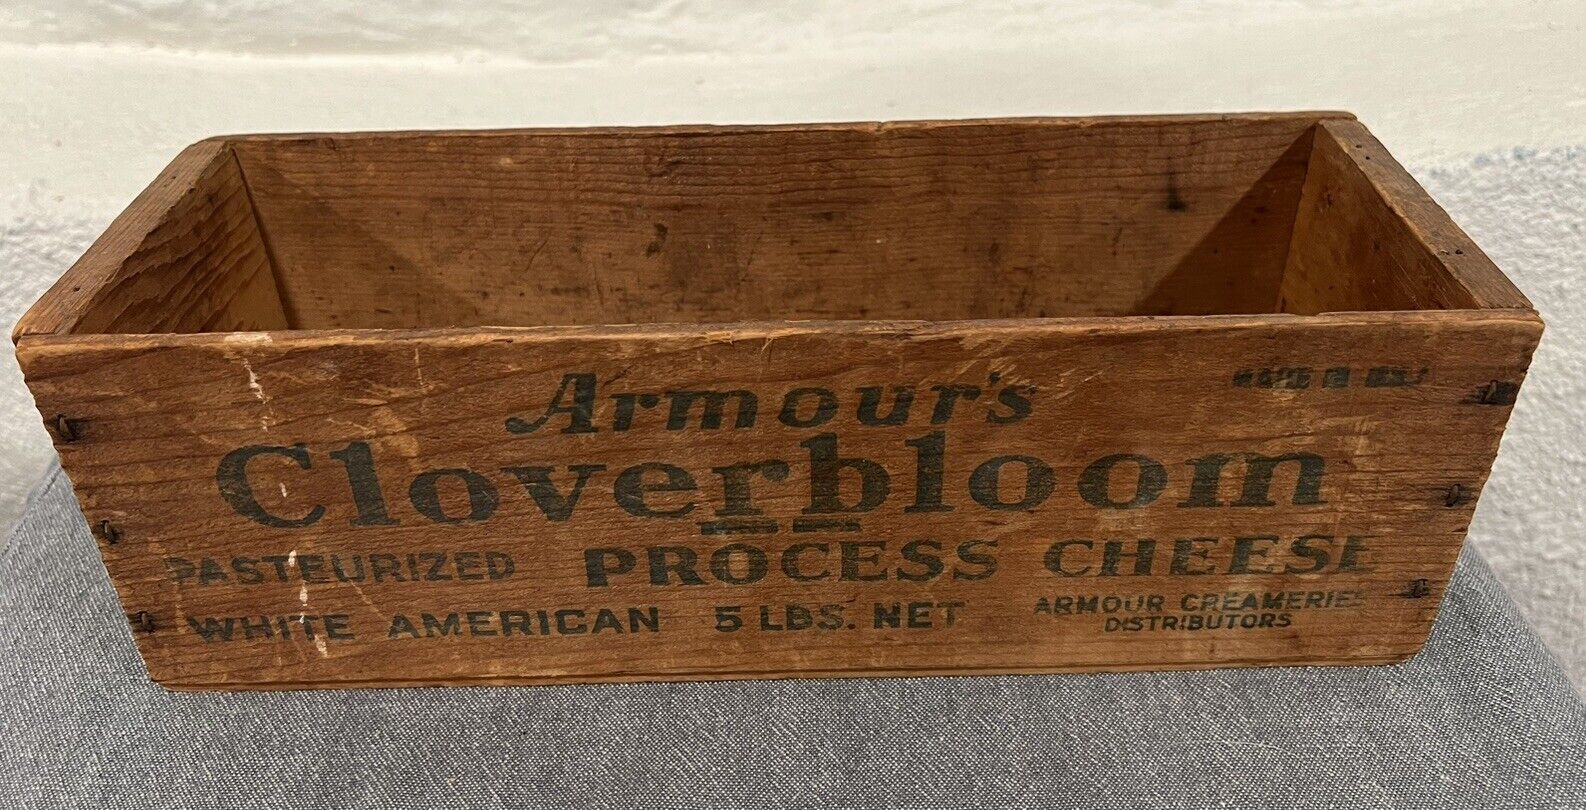 Vintage Cheese Box Wooden  Armours Cloverbloom Process Color American 5 lb